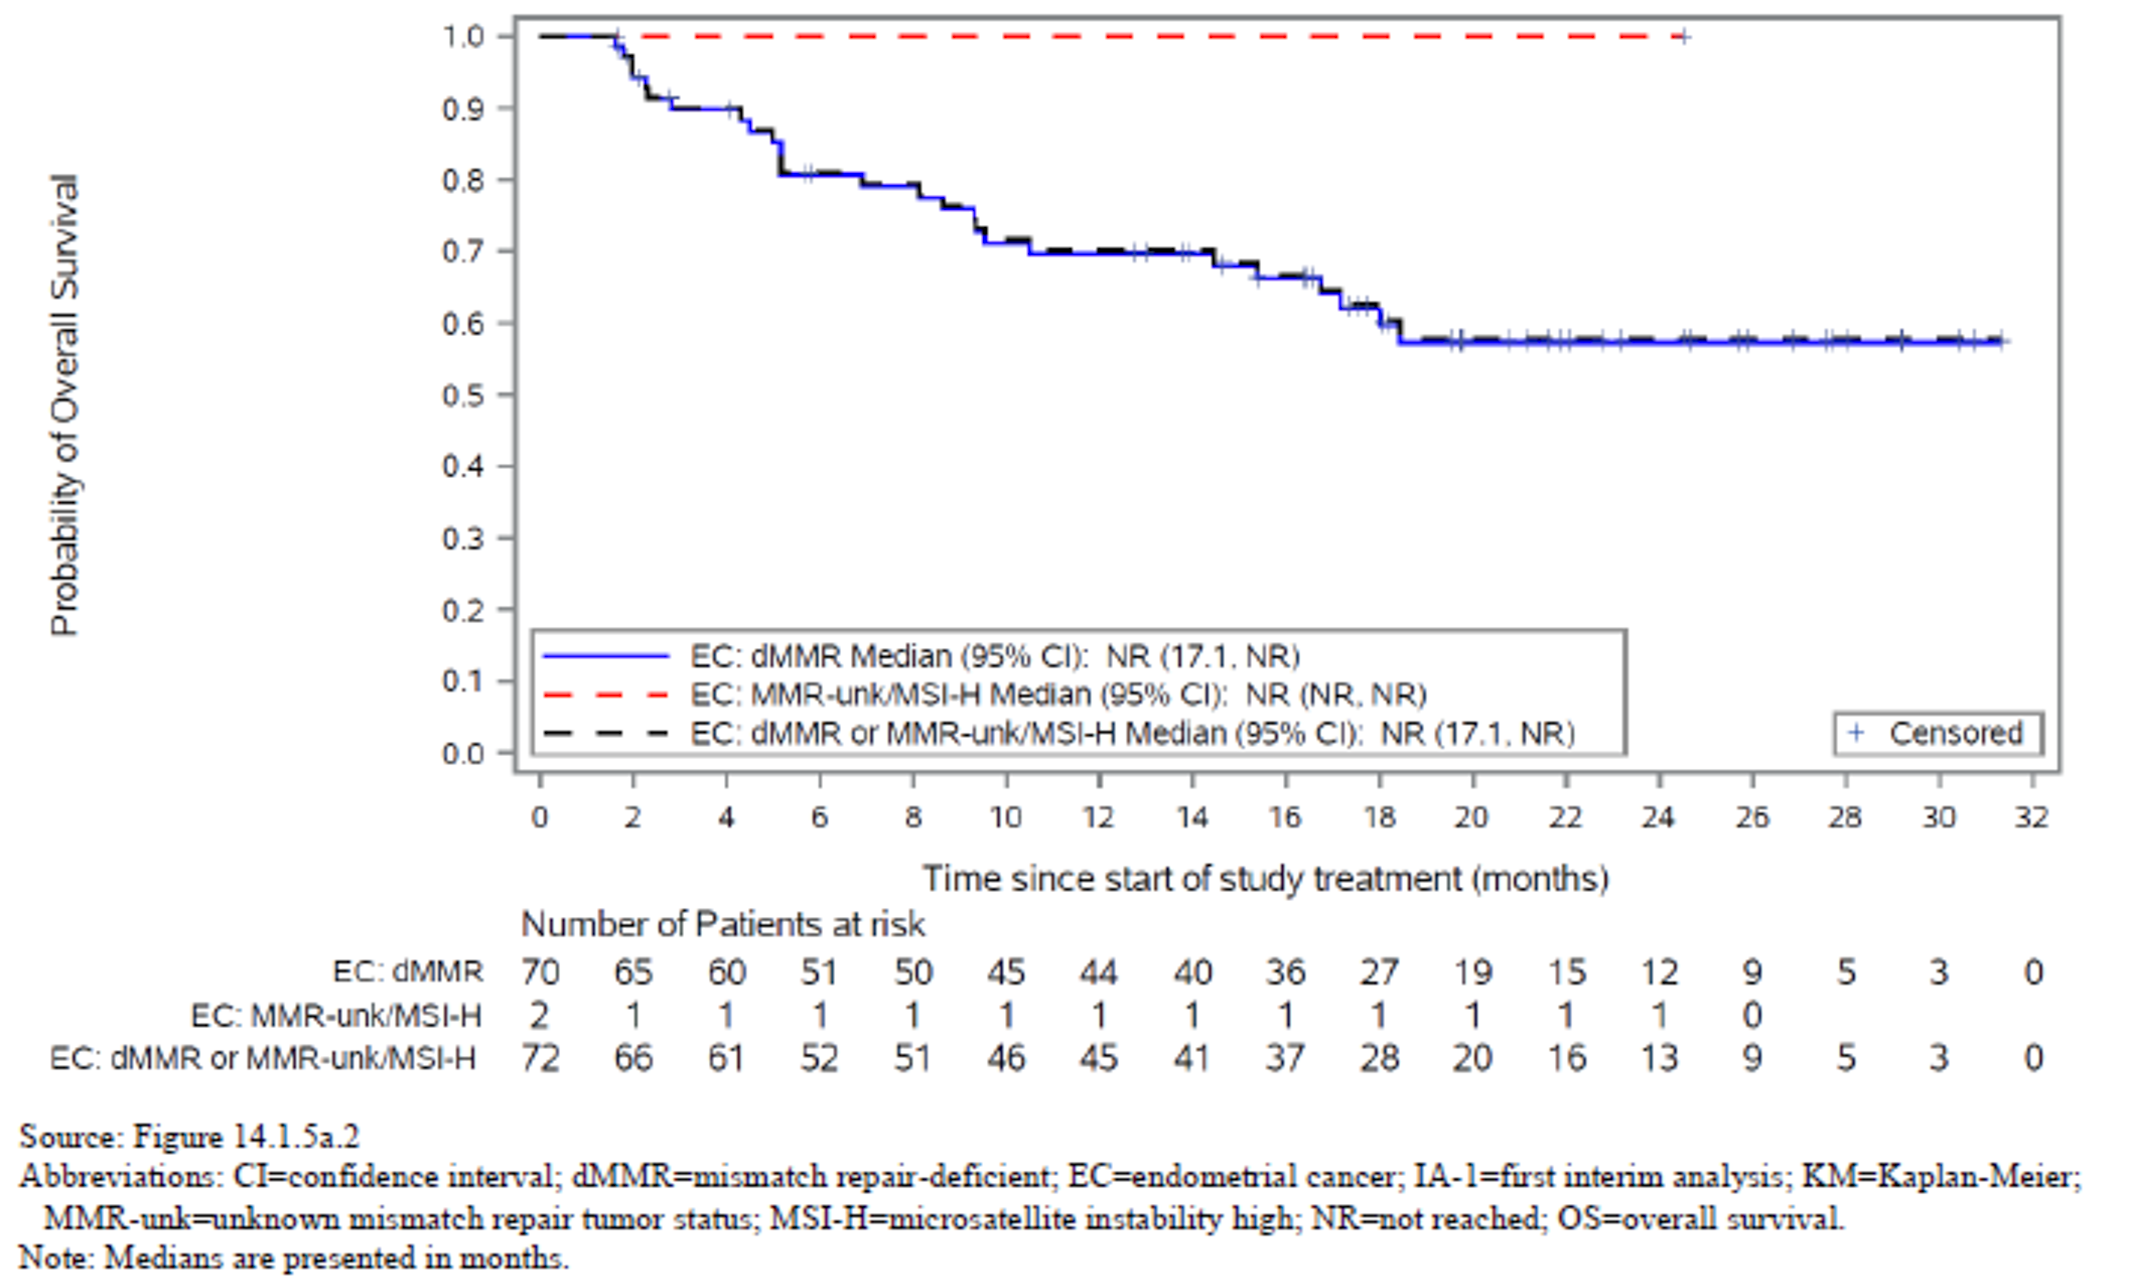 Kaplan-Meier estimates of OS in the subset of patients from IA-1 with dMMR or MSI-H EC that were included in IA-2. The total number of at-risk patients in the dMMR or MMR-unk/MSI-H EC at 0, 4, 8, 12, 16, 20, 24, 28, 32, and 36 months was 72, 66, 61, 52, 51, 46, 45, 41, 37, 28, 20, 16, 13, 9, 5, 3, and 0, respectively.